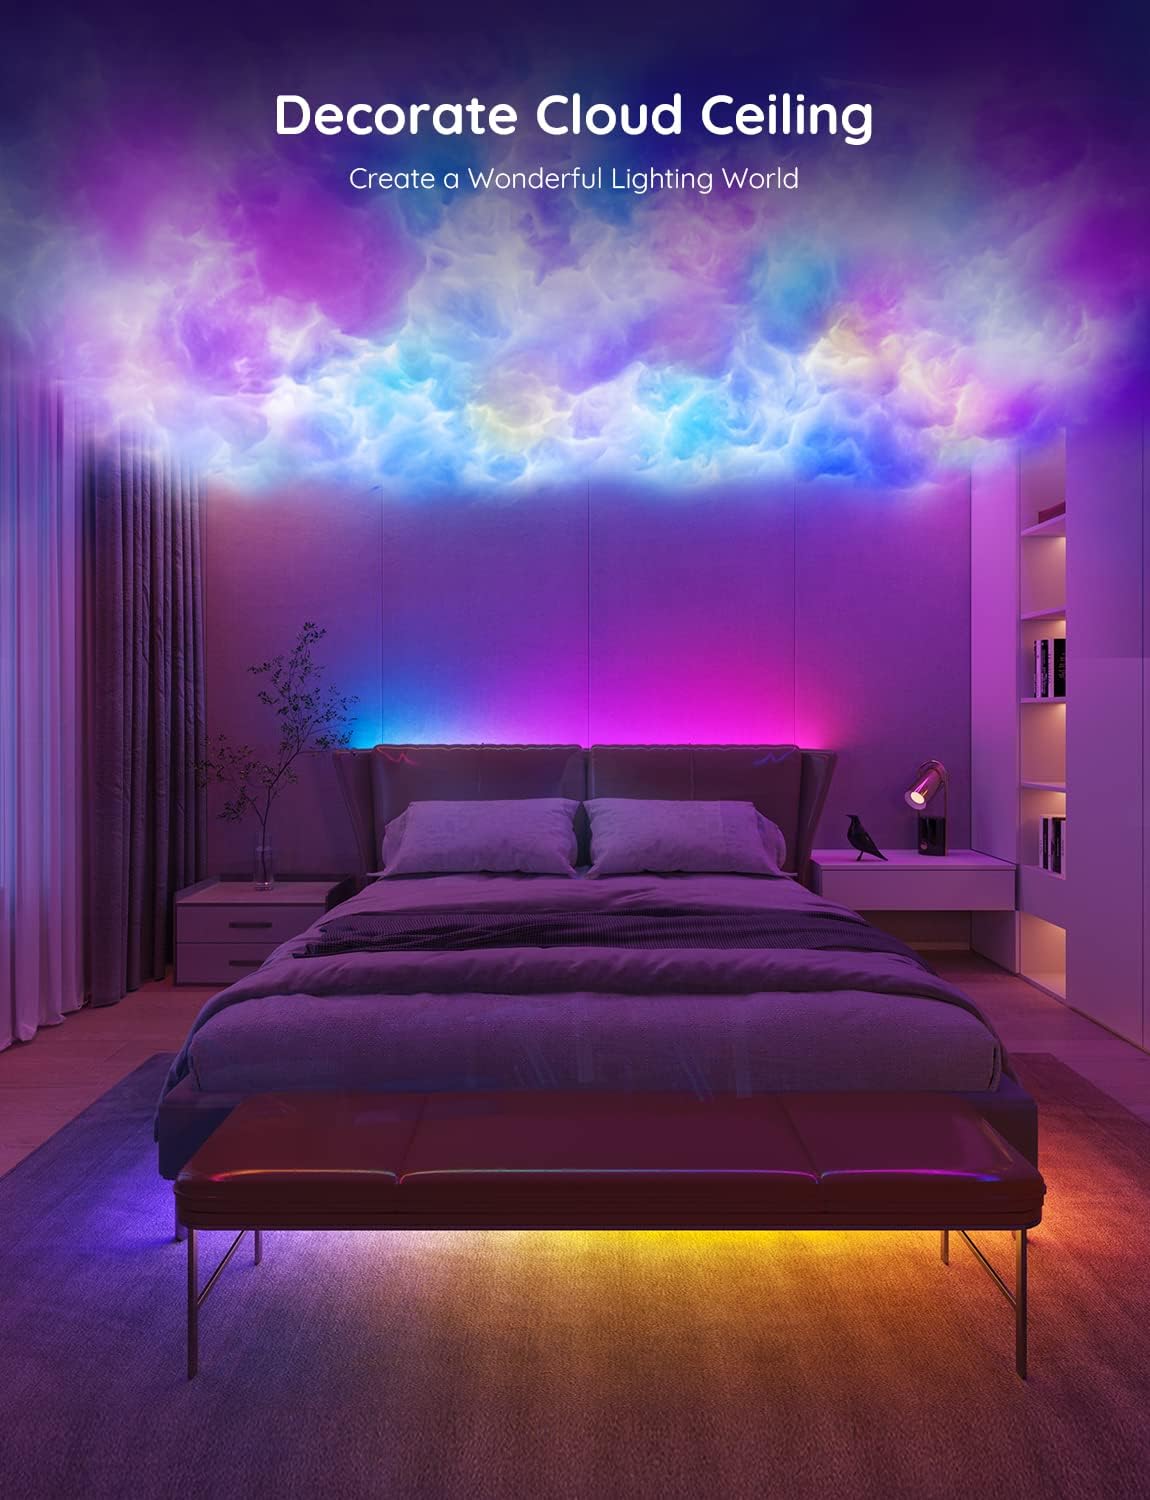 LED-Light-Strip-Led-Strip-Lights-5M-Smart-Light-Strips-with-Alexa-and-Google-Home-App-Control-Remote-16-Million-Colors-RGB-Led-Lights-for-Bedroom-Home-Kitchen-Party-56